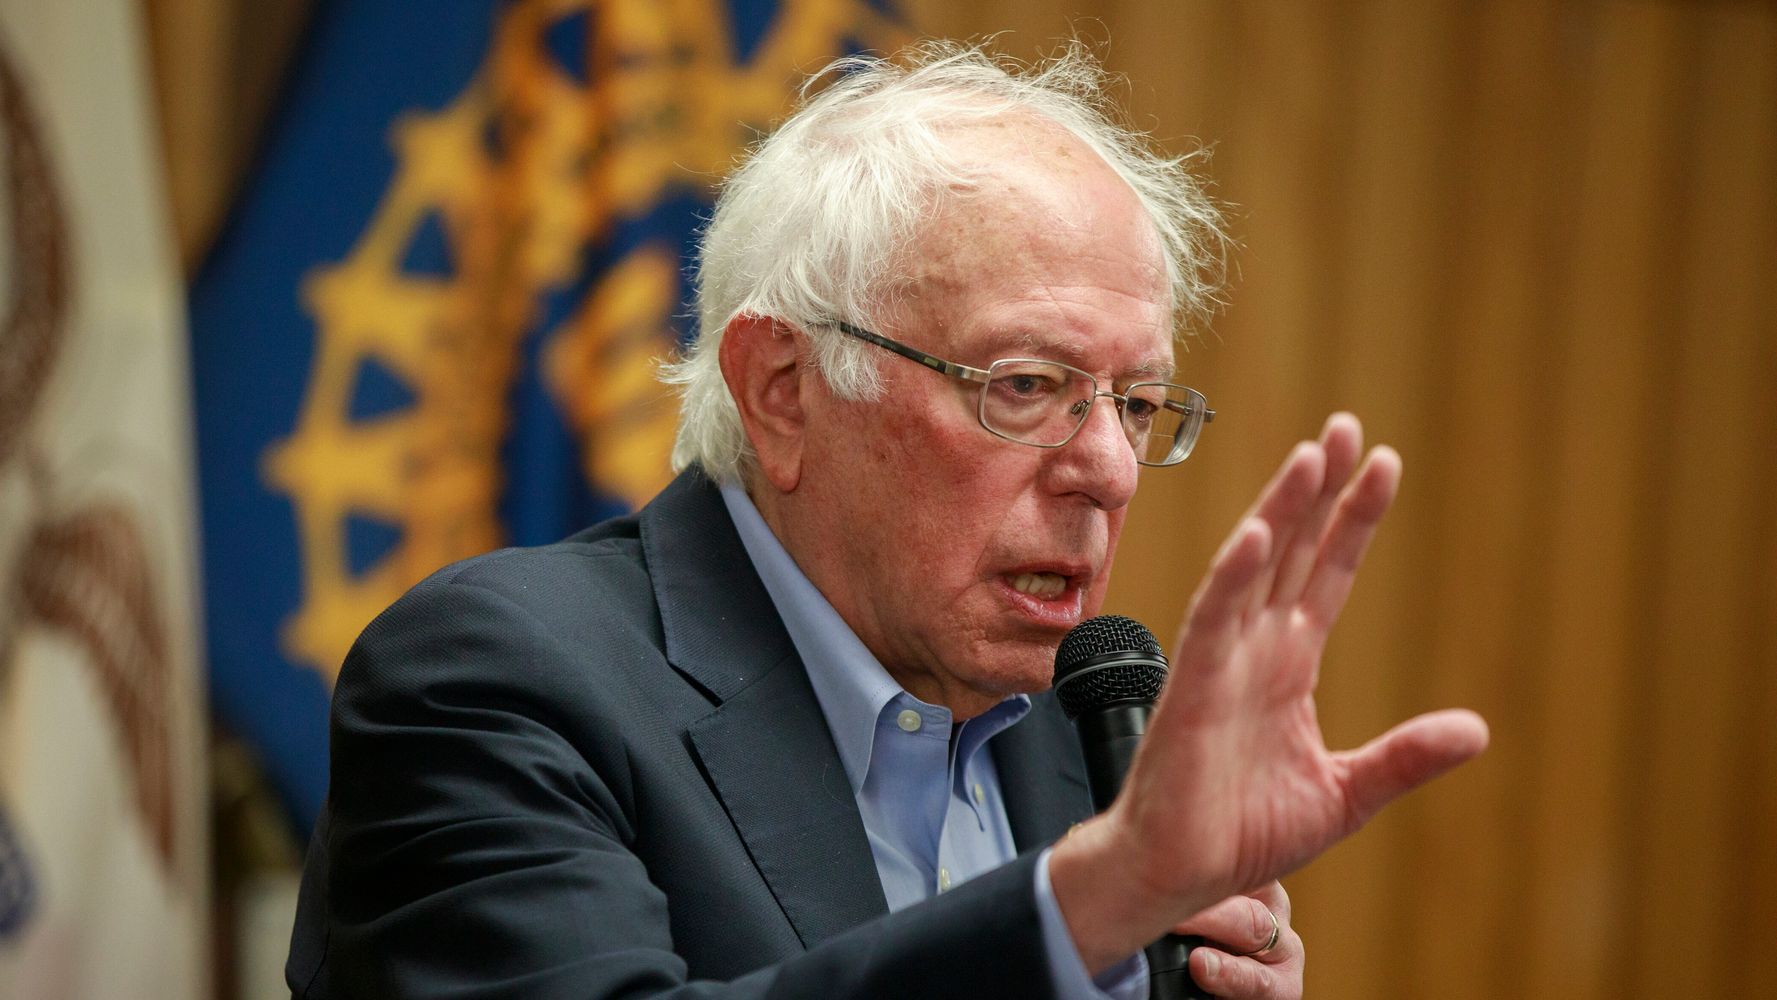 Flipboard: Bernie Sanders Plans To Give Workers A Stake In Their Corporate Employers